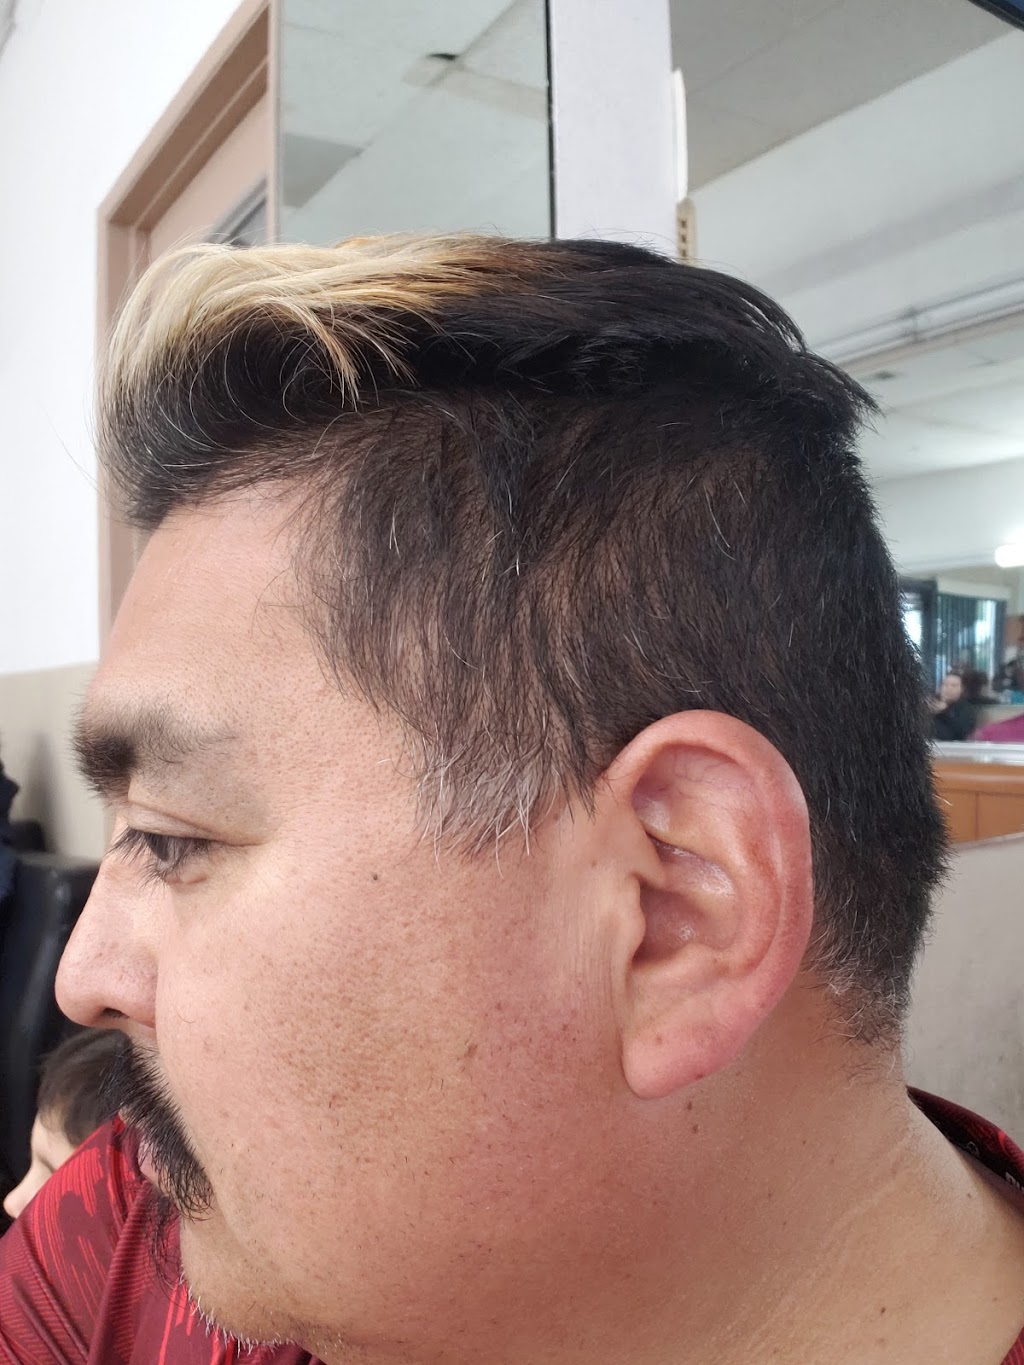 Friends Barber Shop | 18169 Valley Blvd, Rowland Heights, CA 91748, USA | Phone: (626) 810-5632